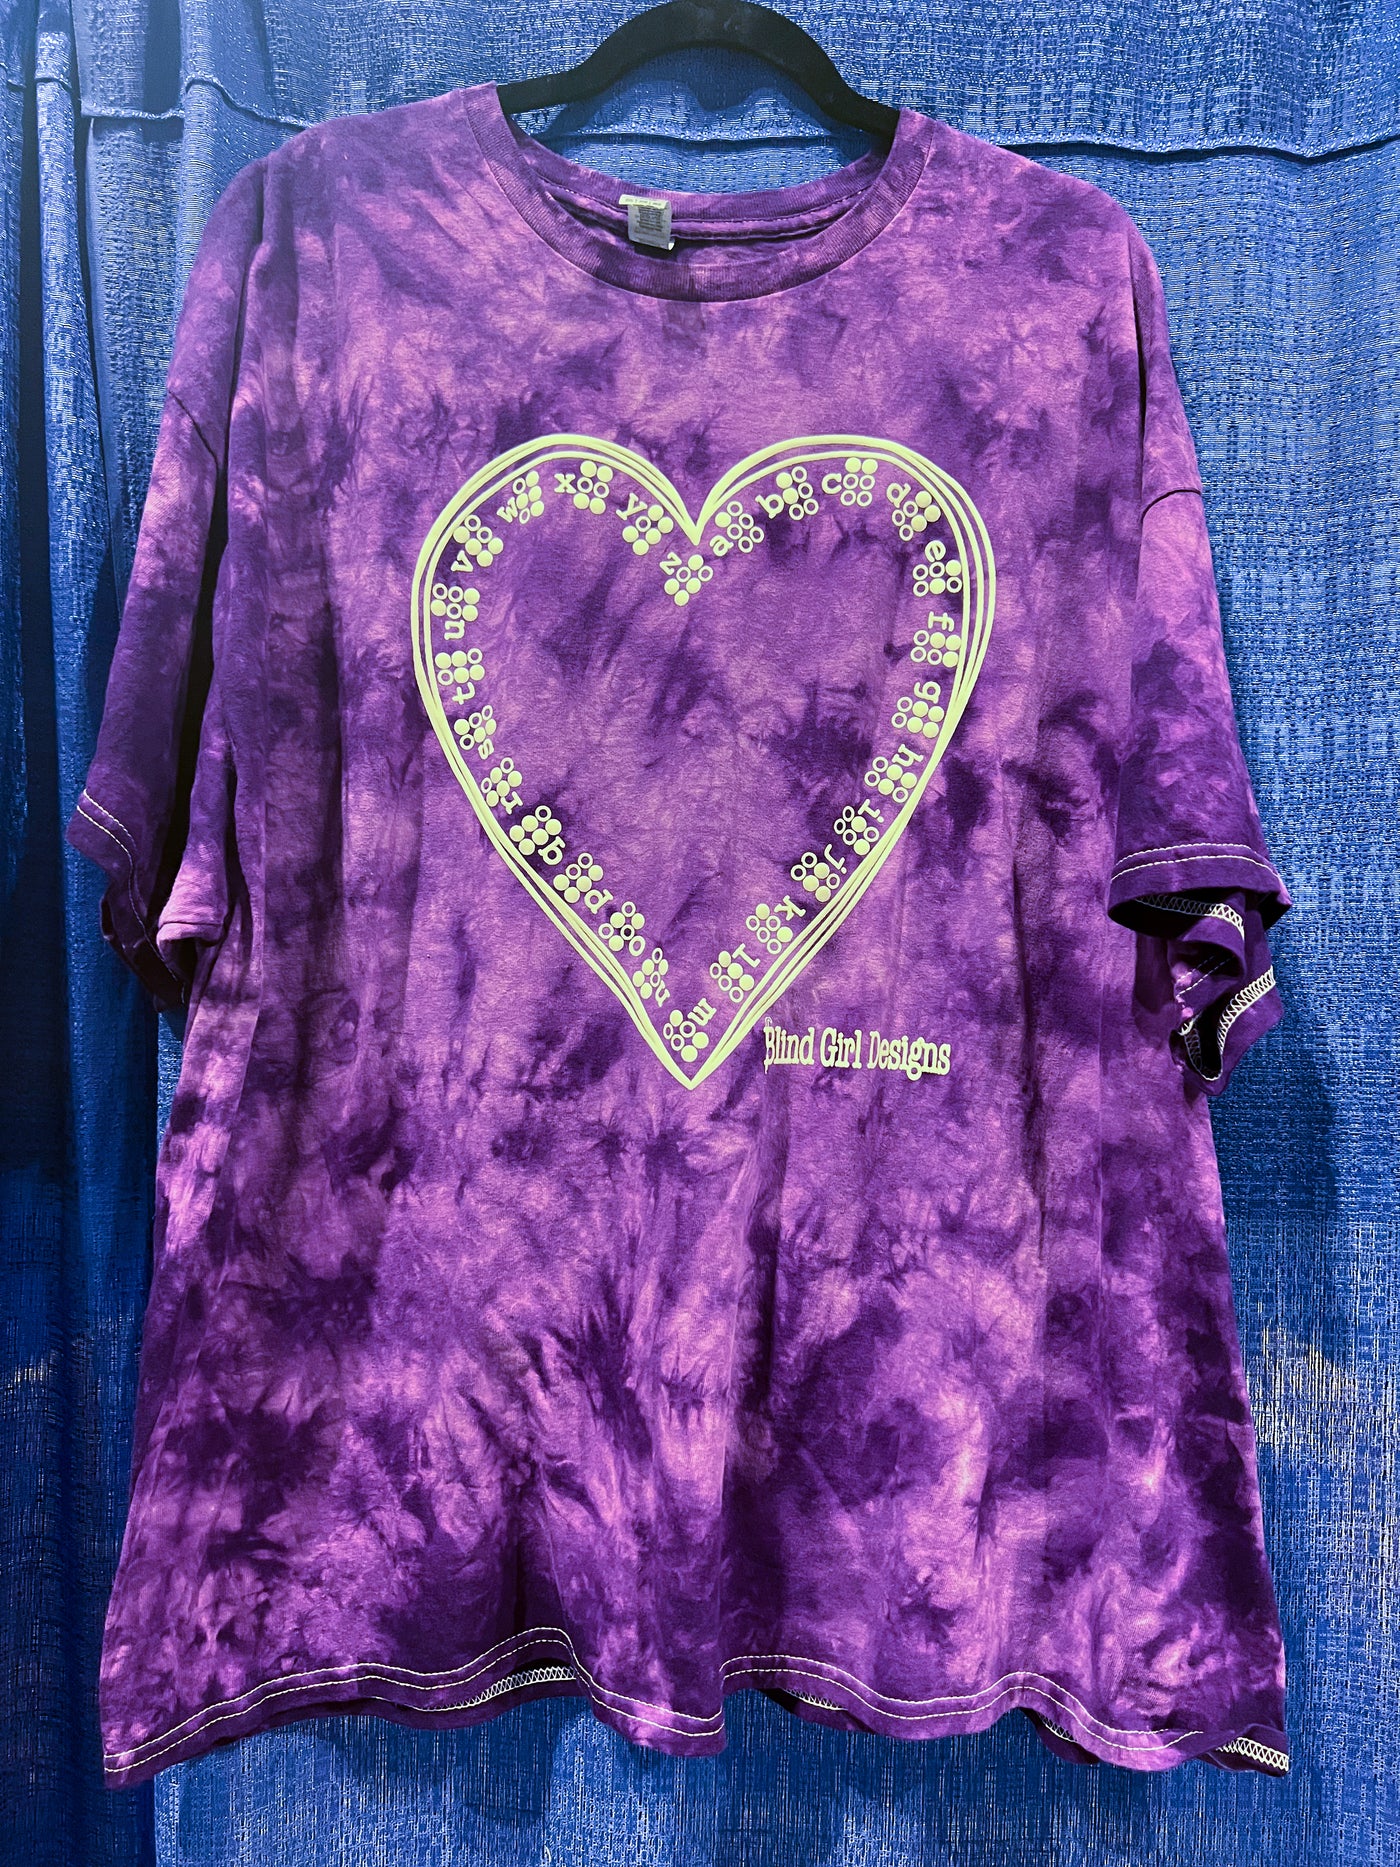 Braille Hearts T-Shirt - Dark and Light Purple Tie-Dyed